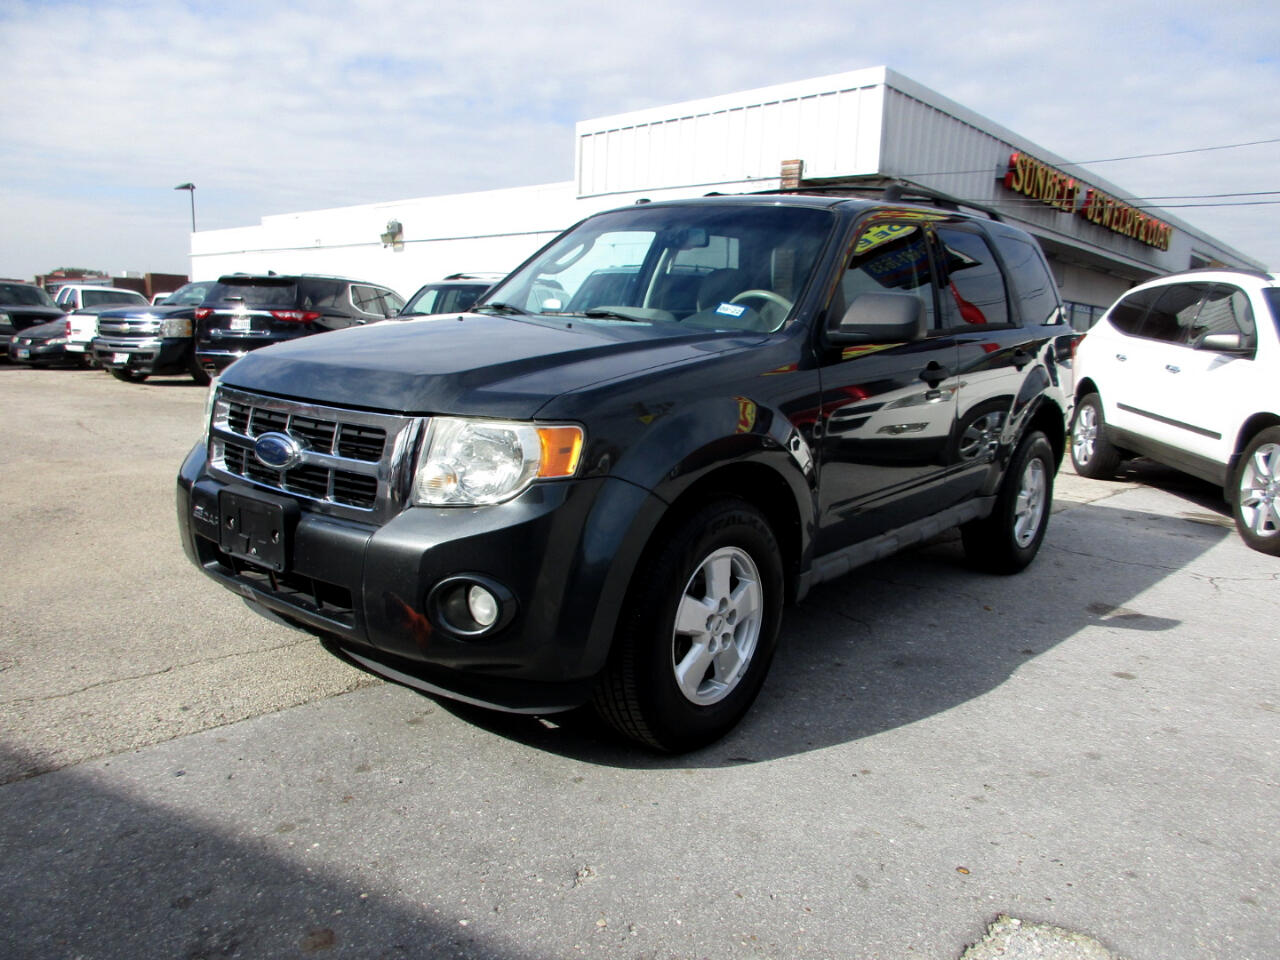 Ford Escape FWD 4dr V6 Auto XLT 2009